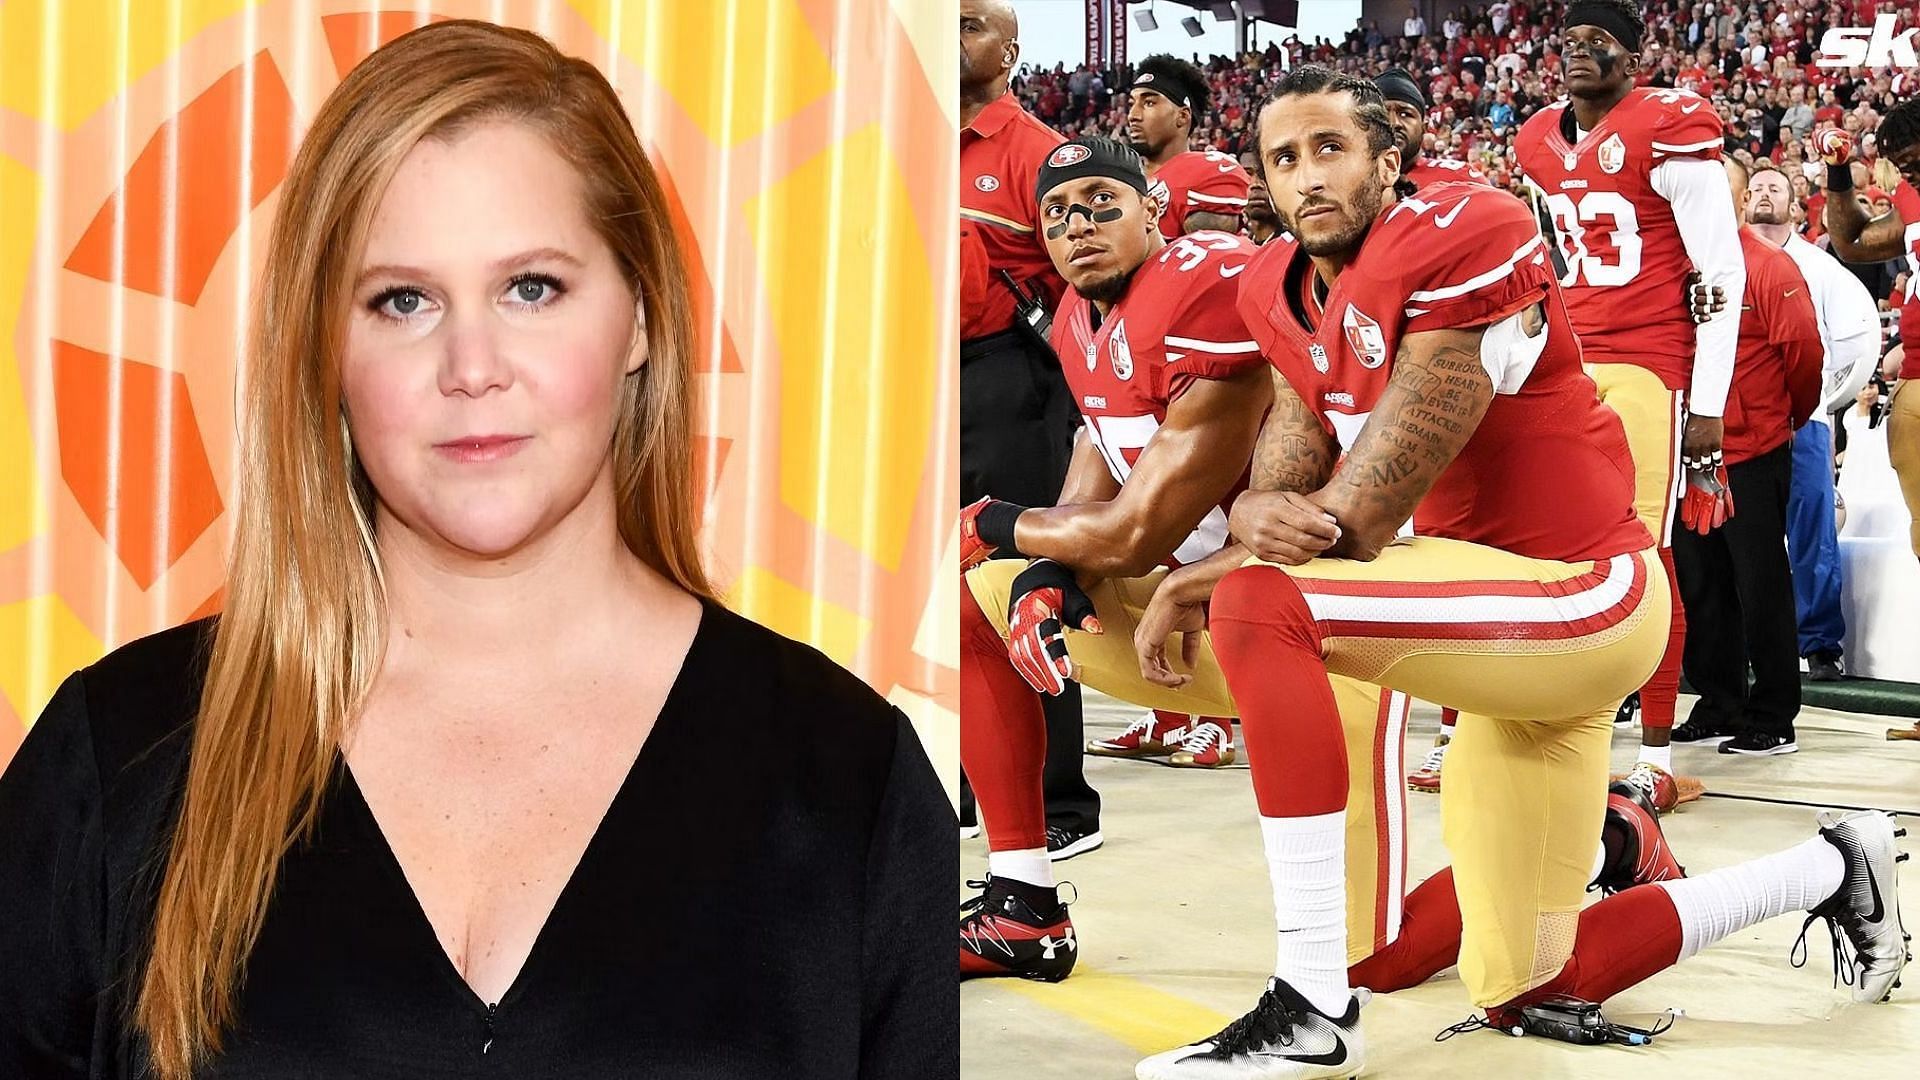  Amy Schumer stood firm on Super Bowl stance